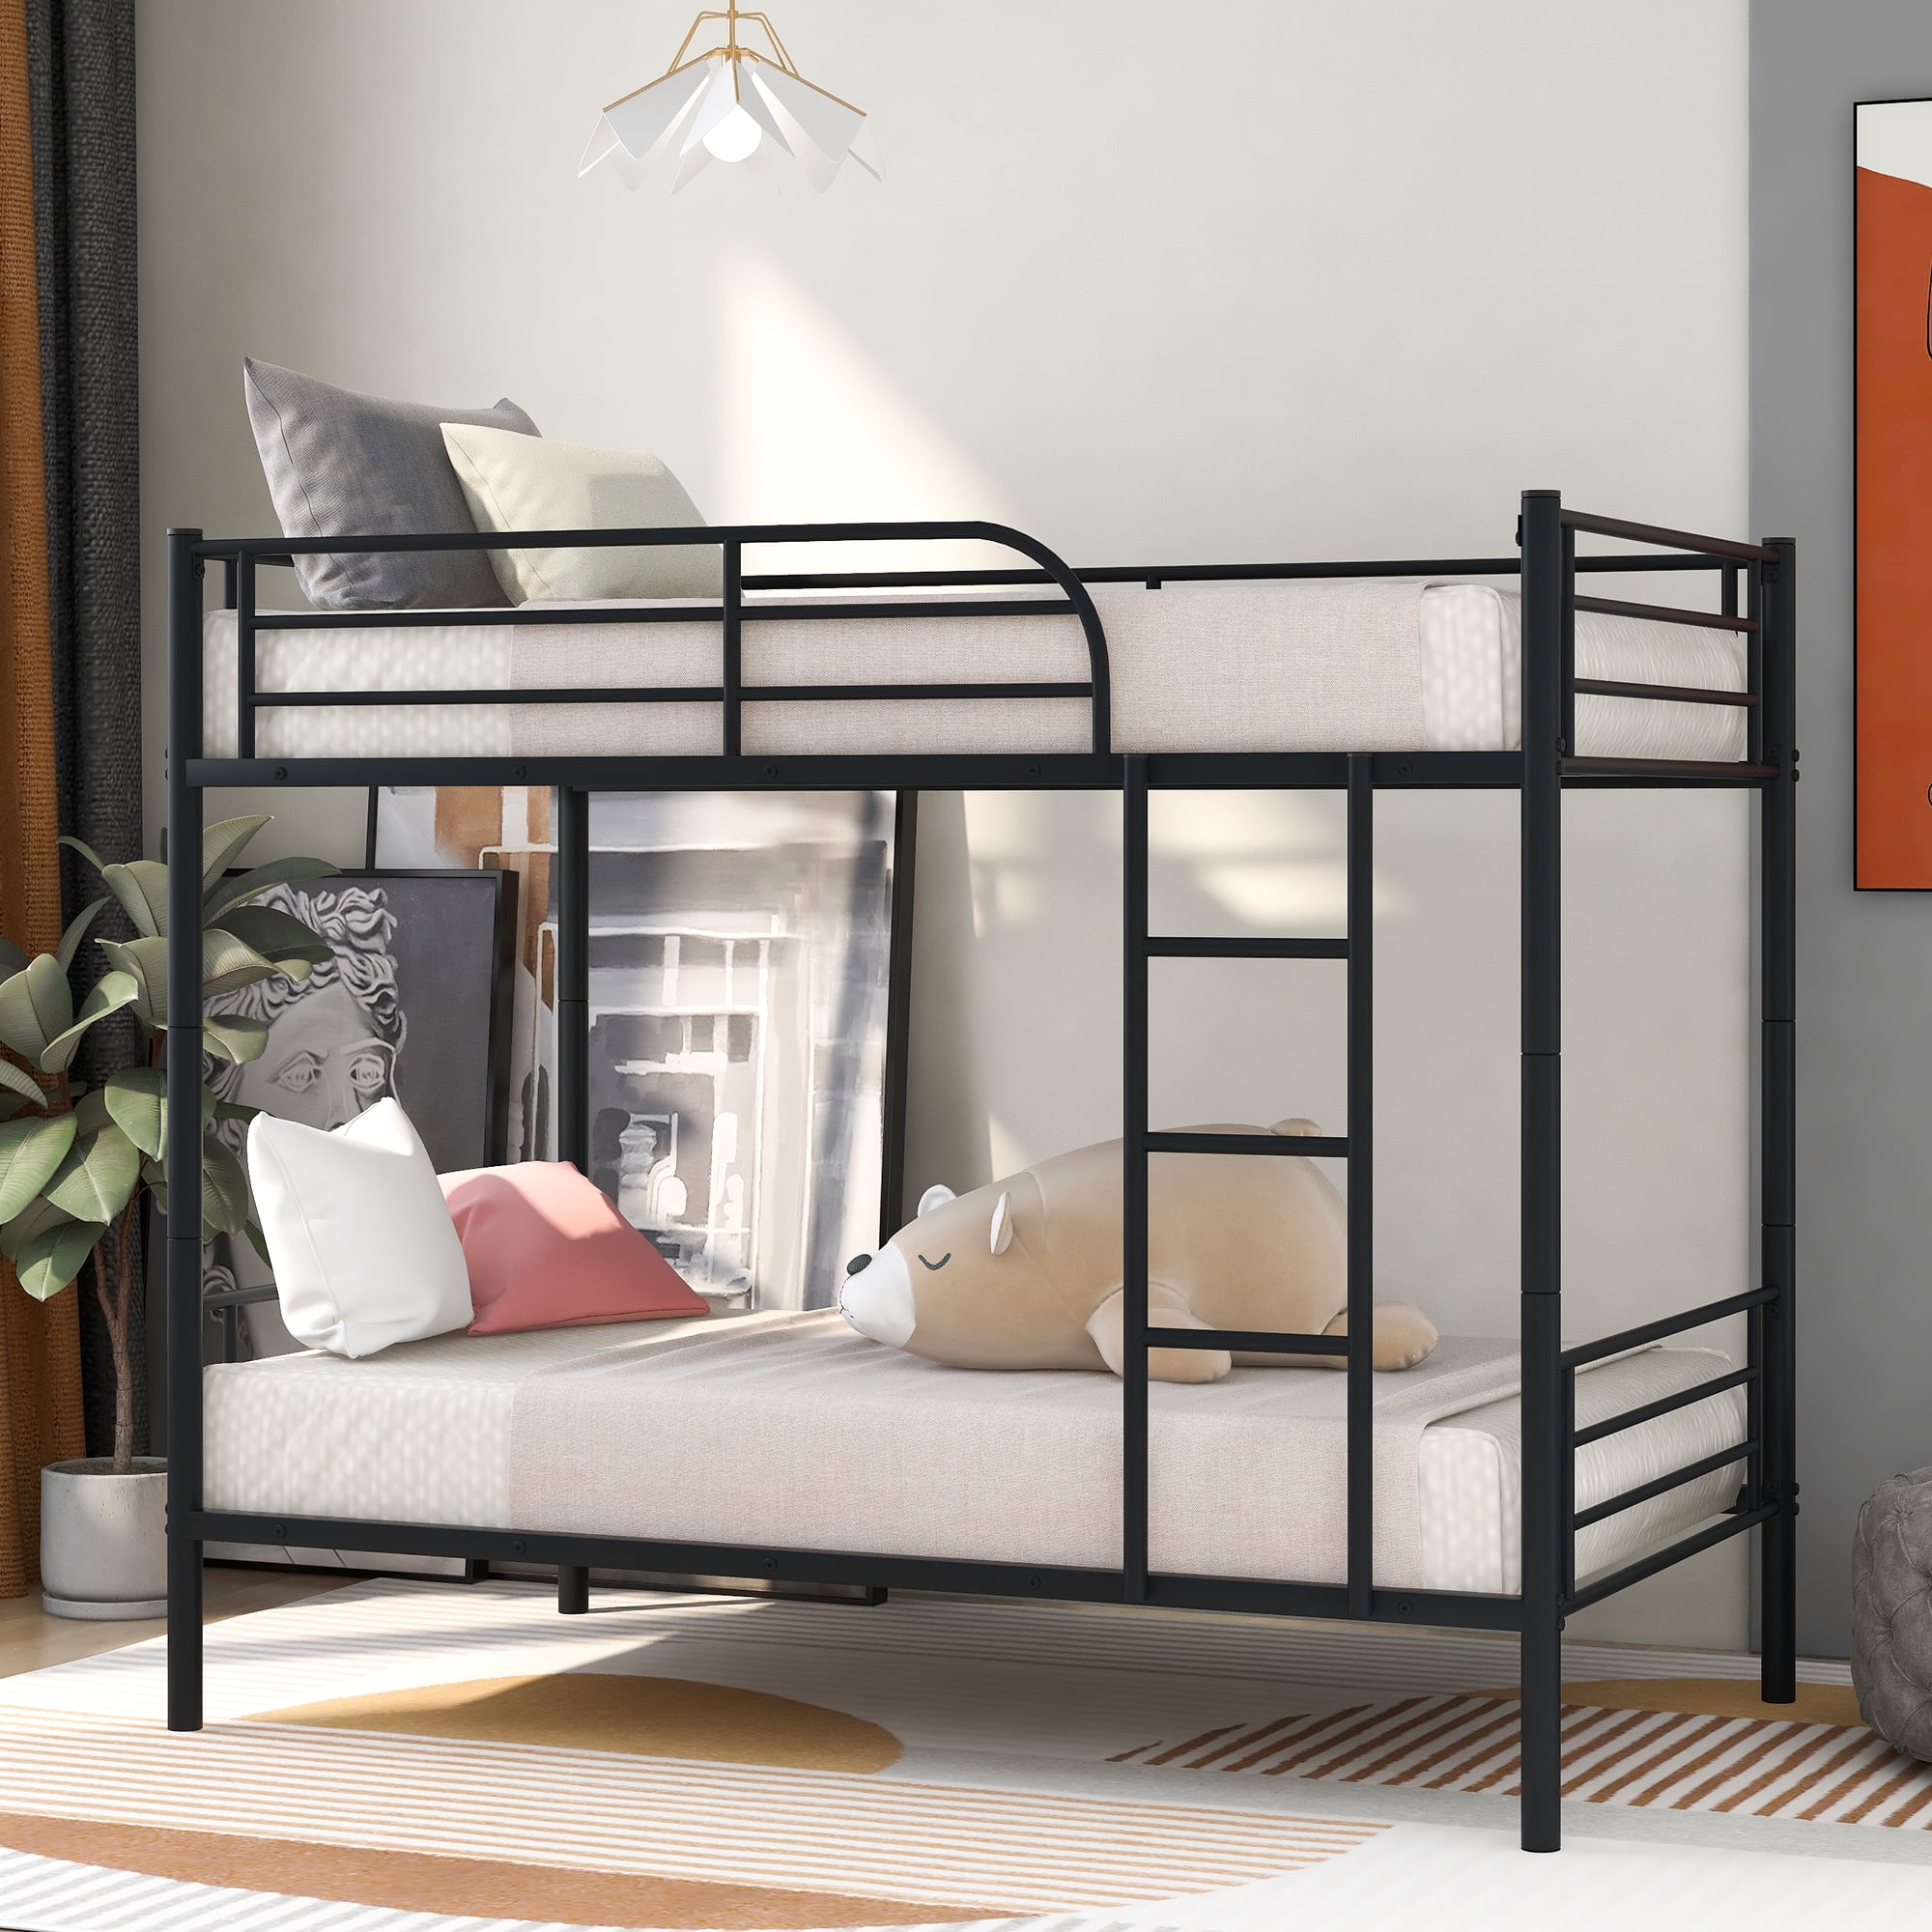 Uhomepro Twin Over Metal Bunk Beds, Can Bunk Beds Be Separated